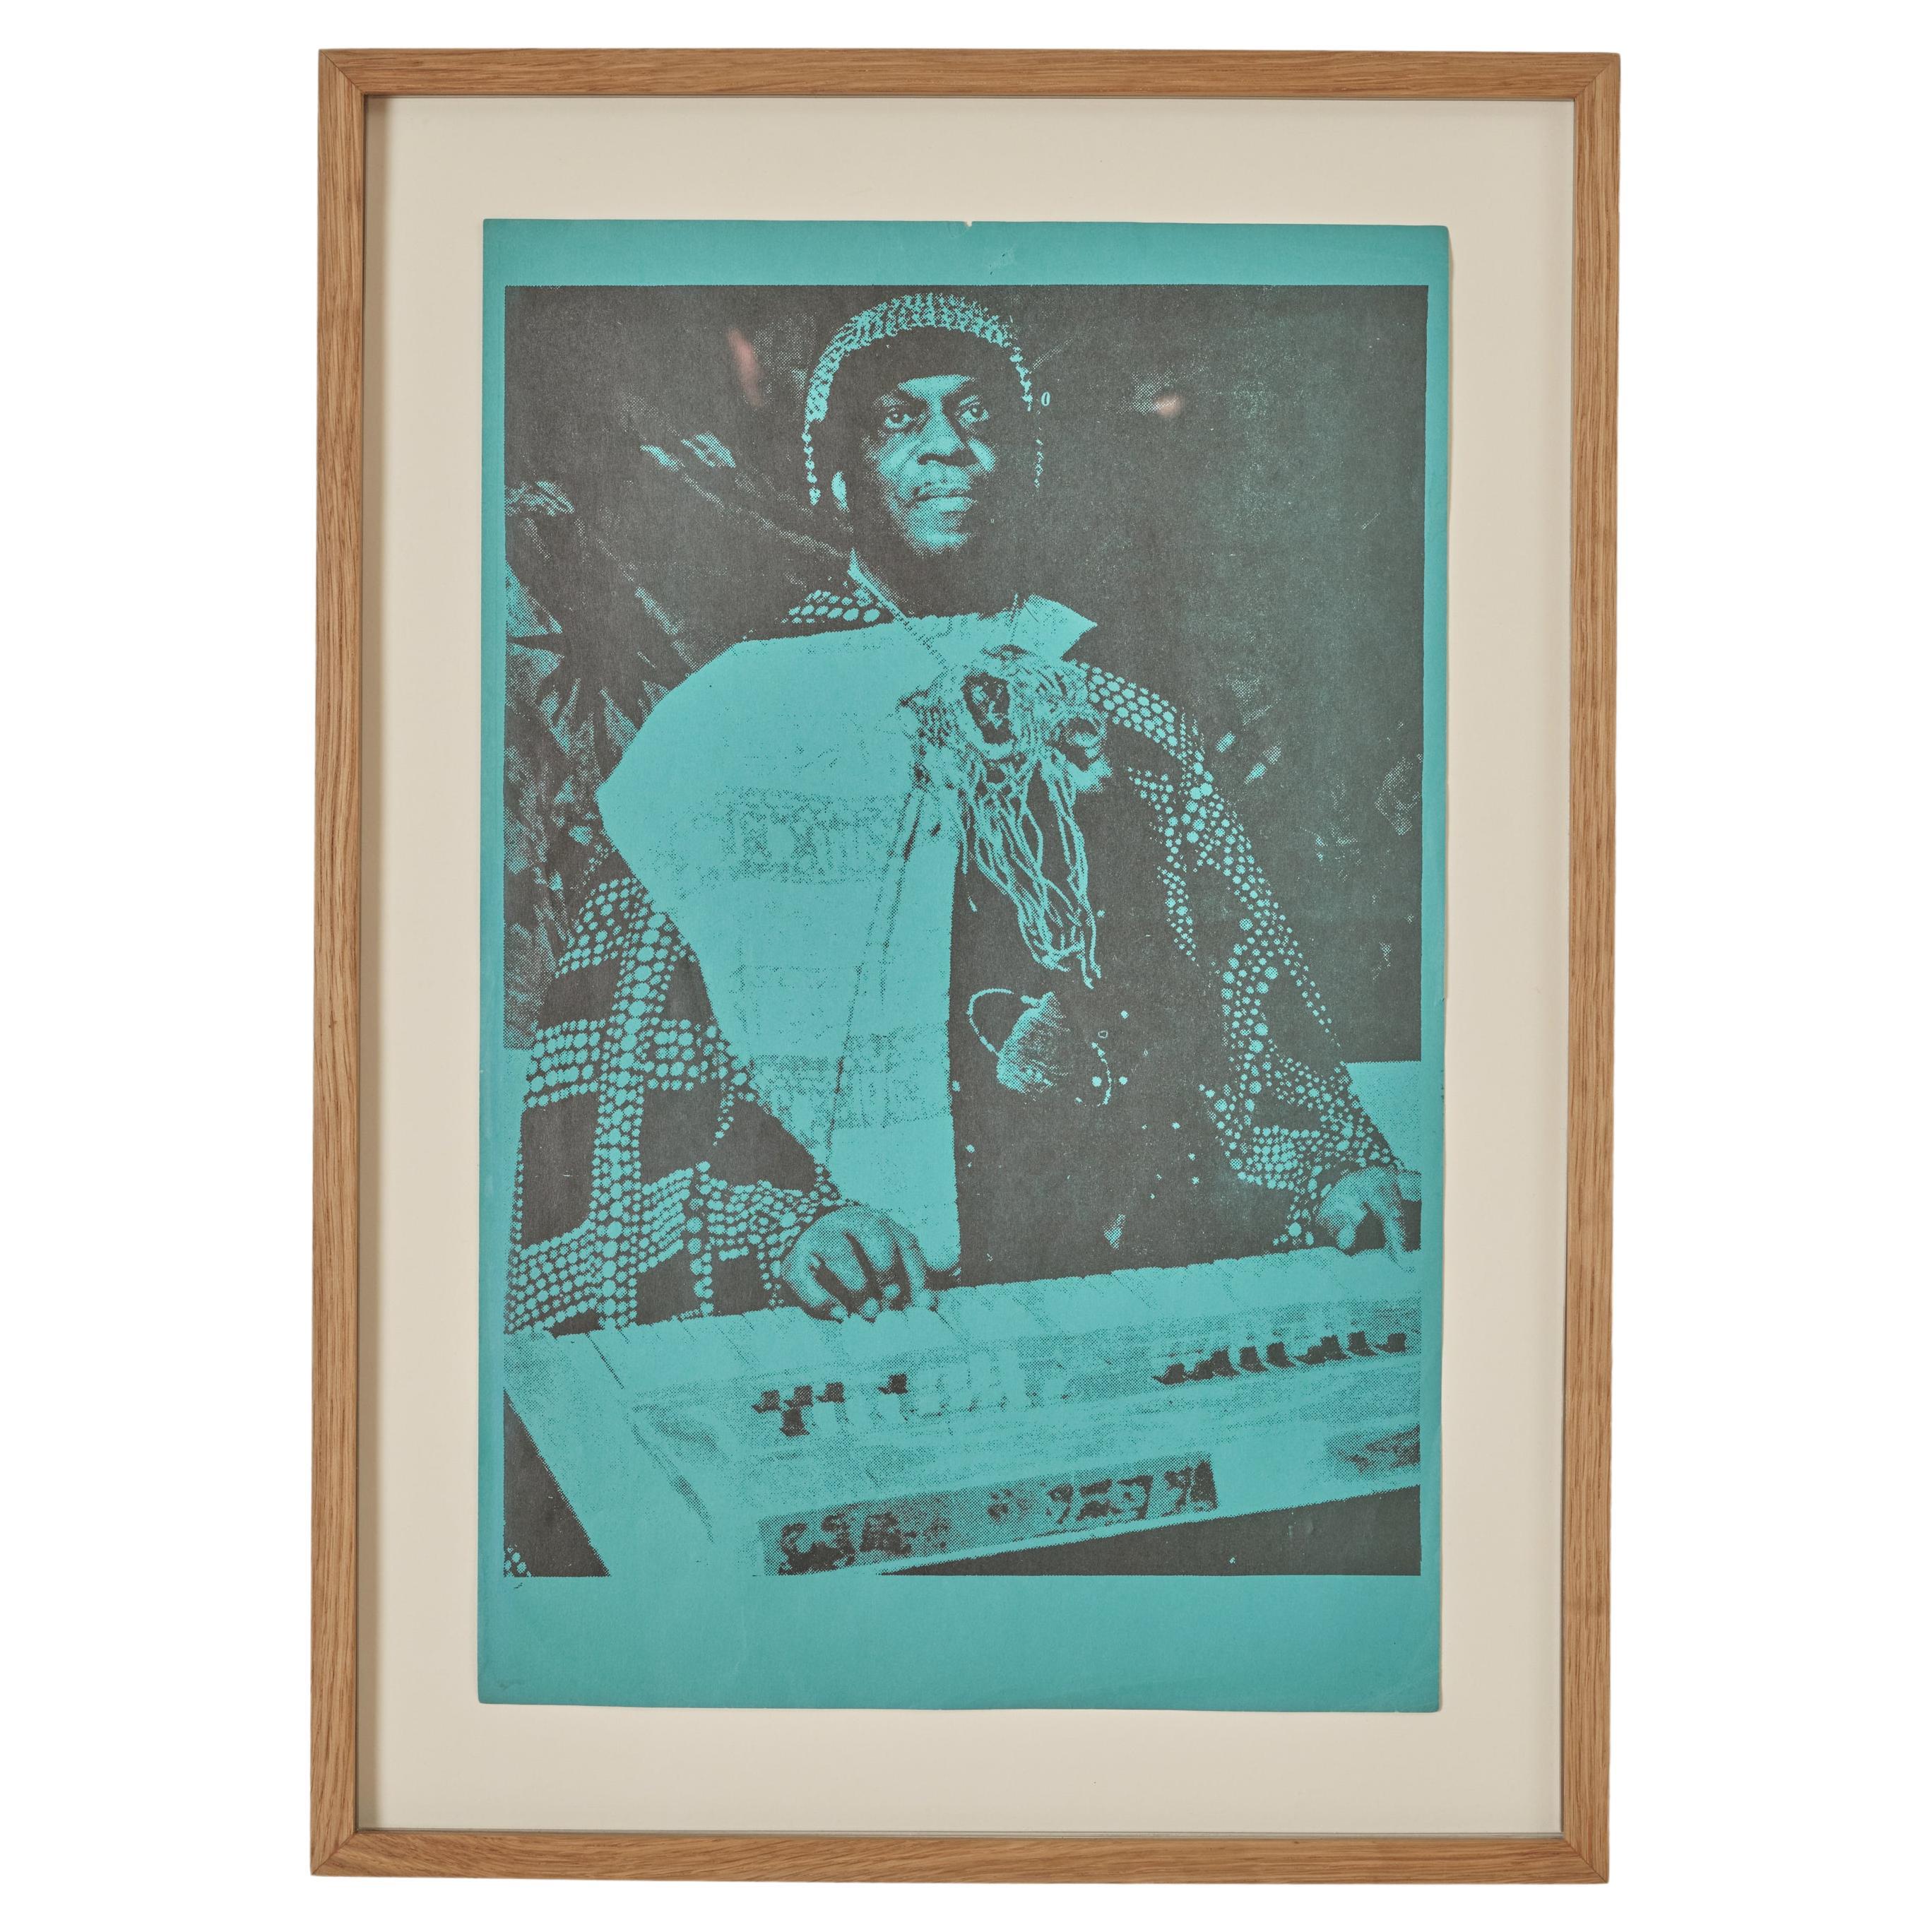 Concert Poster of Sun Ra at Larrys Hideaway For Sale